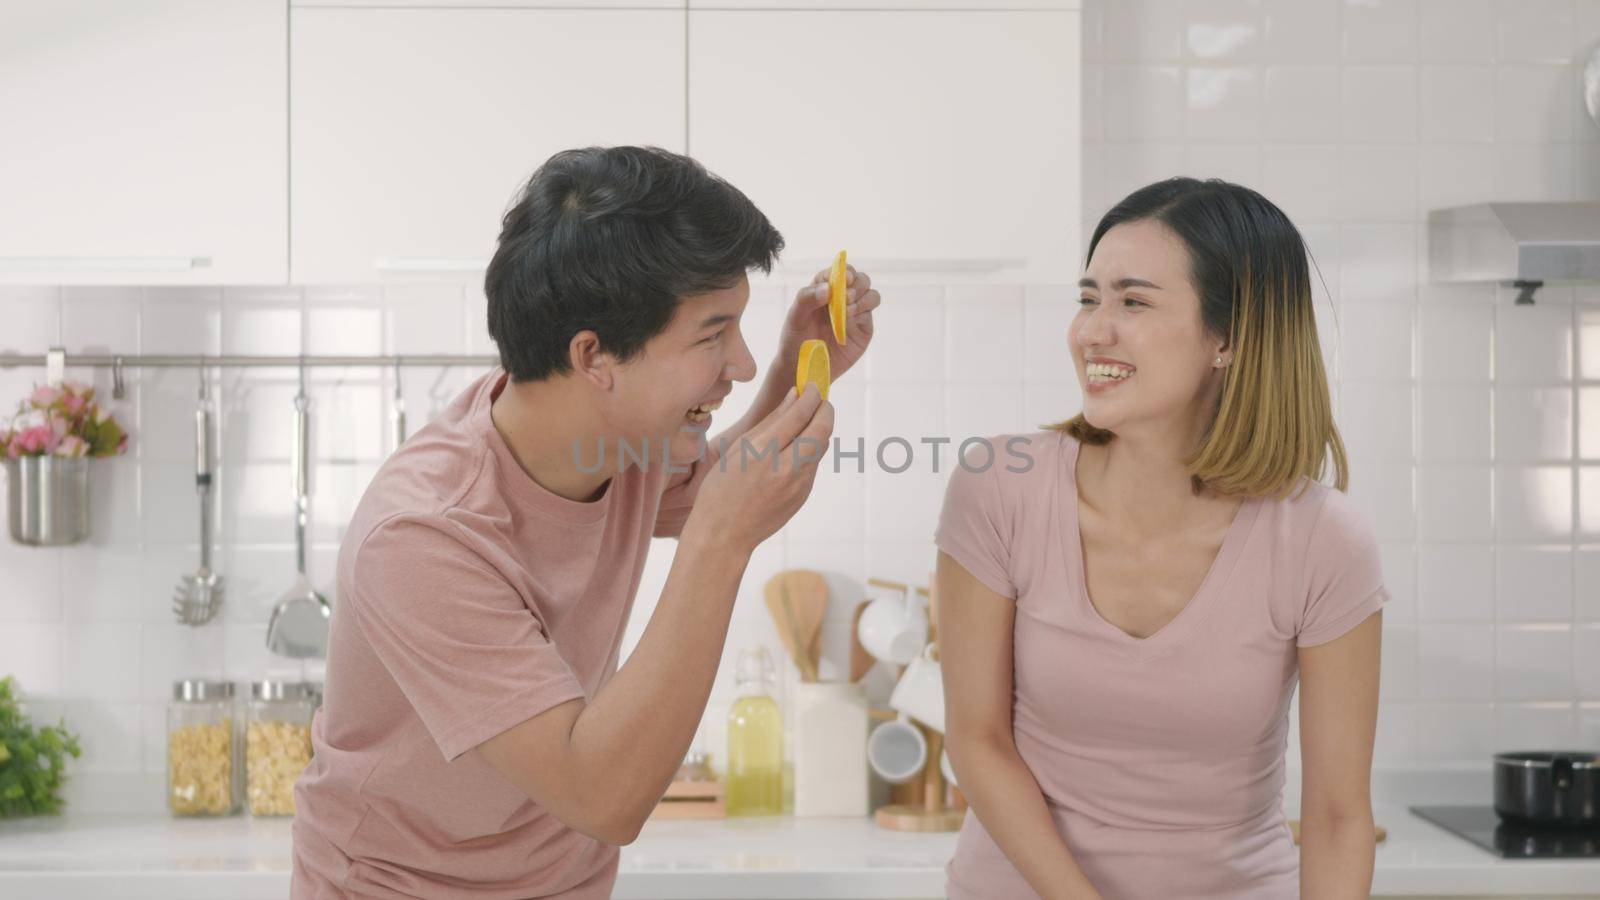 couple husband and wife enjoying smile and laugh holds a cut orange in front of the guy's eyes by Sorapop